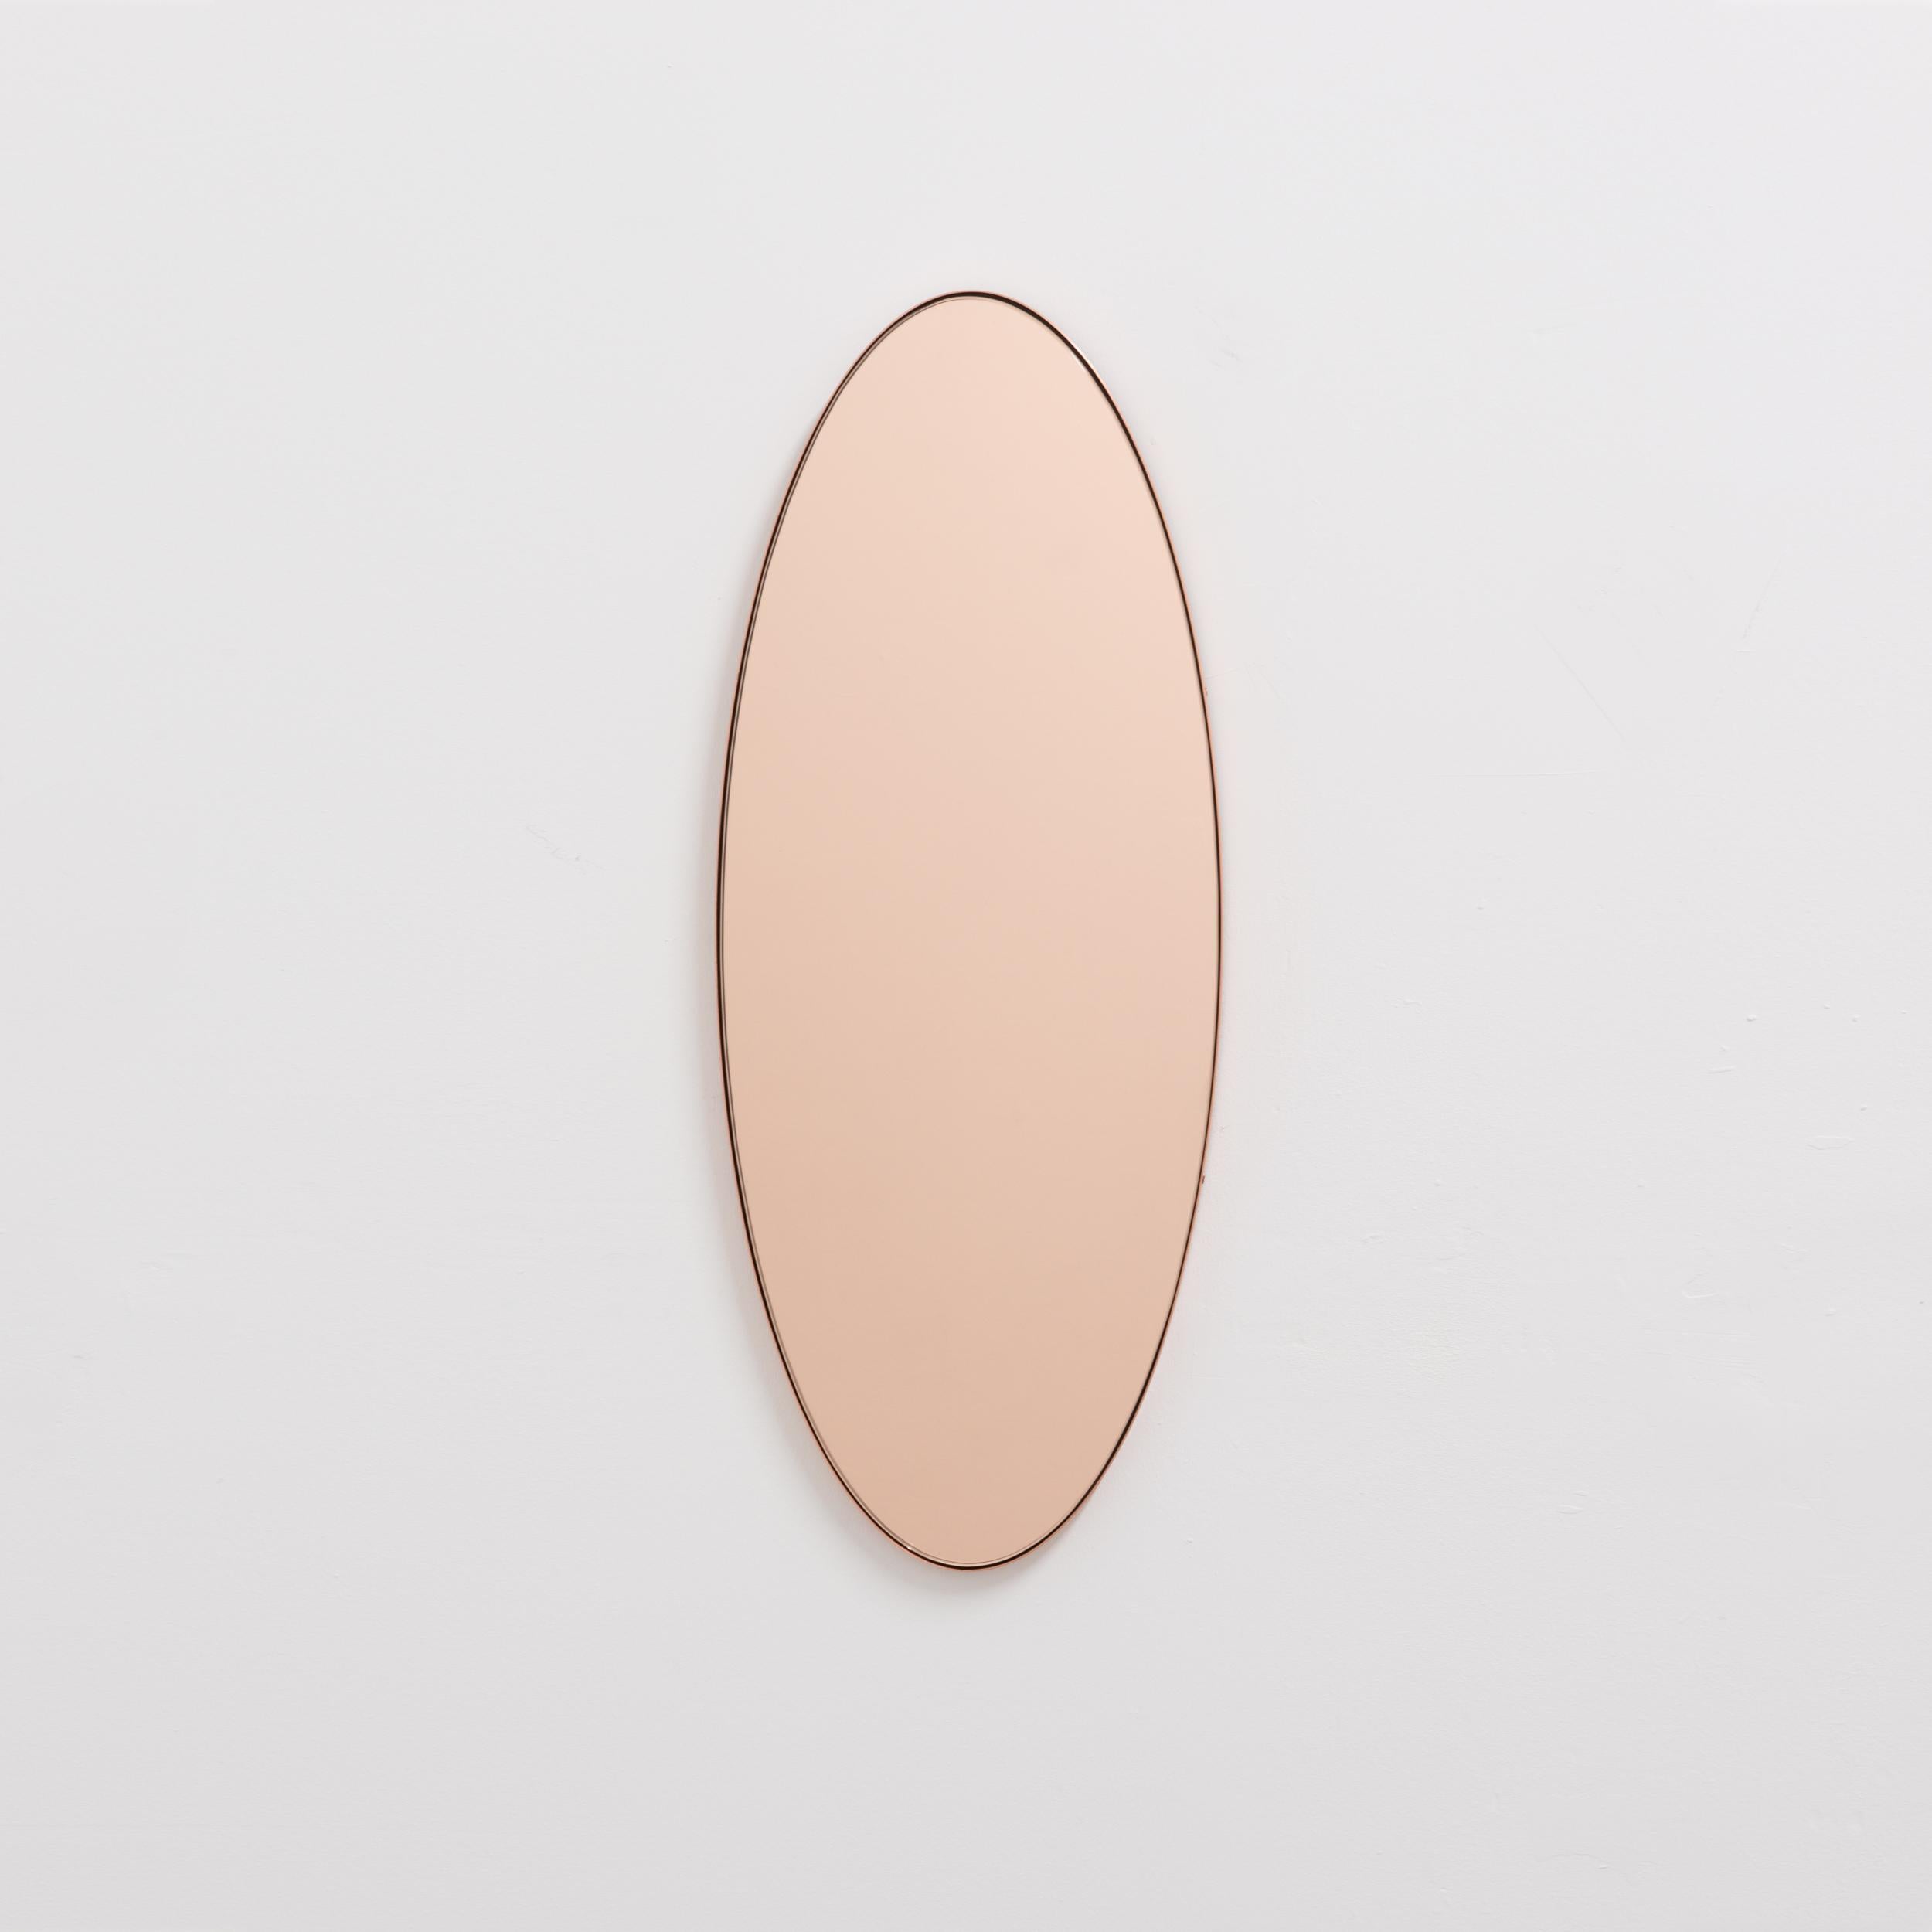 In Stock Ovalis Oval Shaped Rose Gold Mirror with Copper Frame, Small For Sale 1